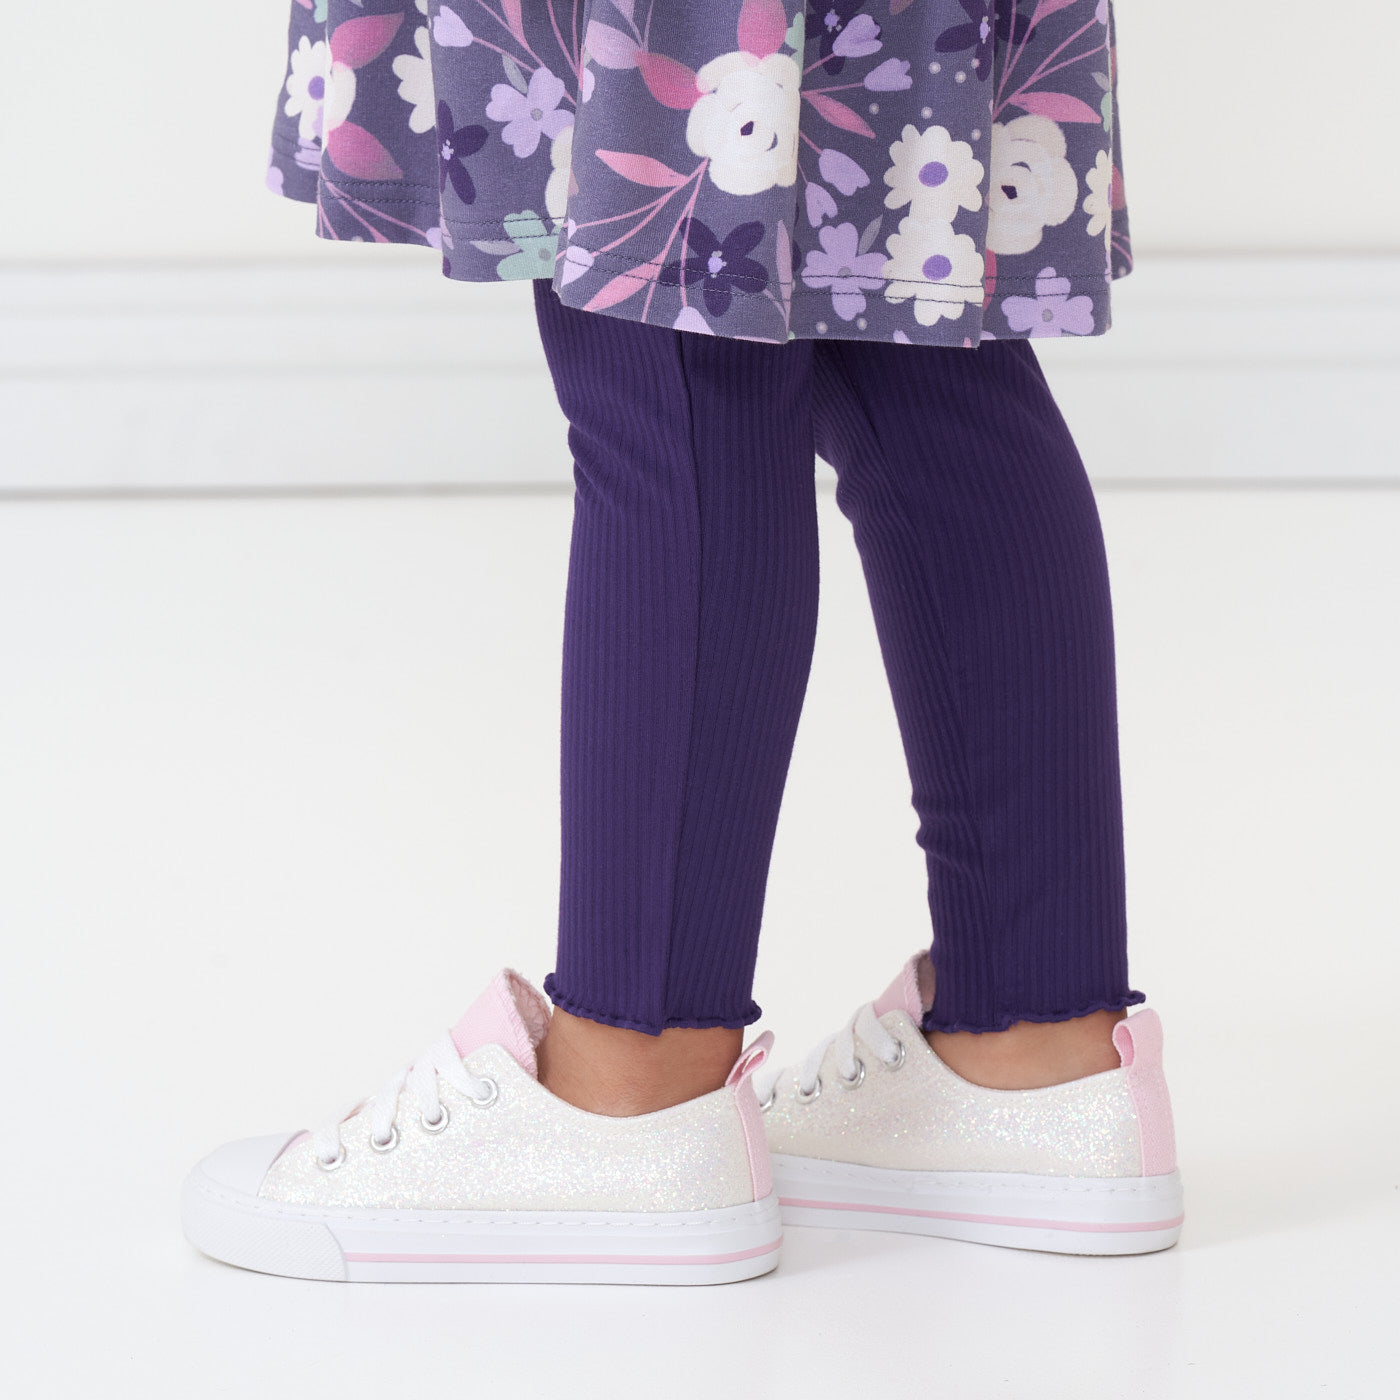 Close up image of a child wearing Deep Amethyst ribbed lettuce leggings and coordinating Sugar Plum Floral dress